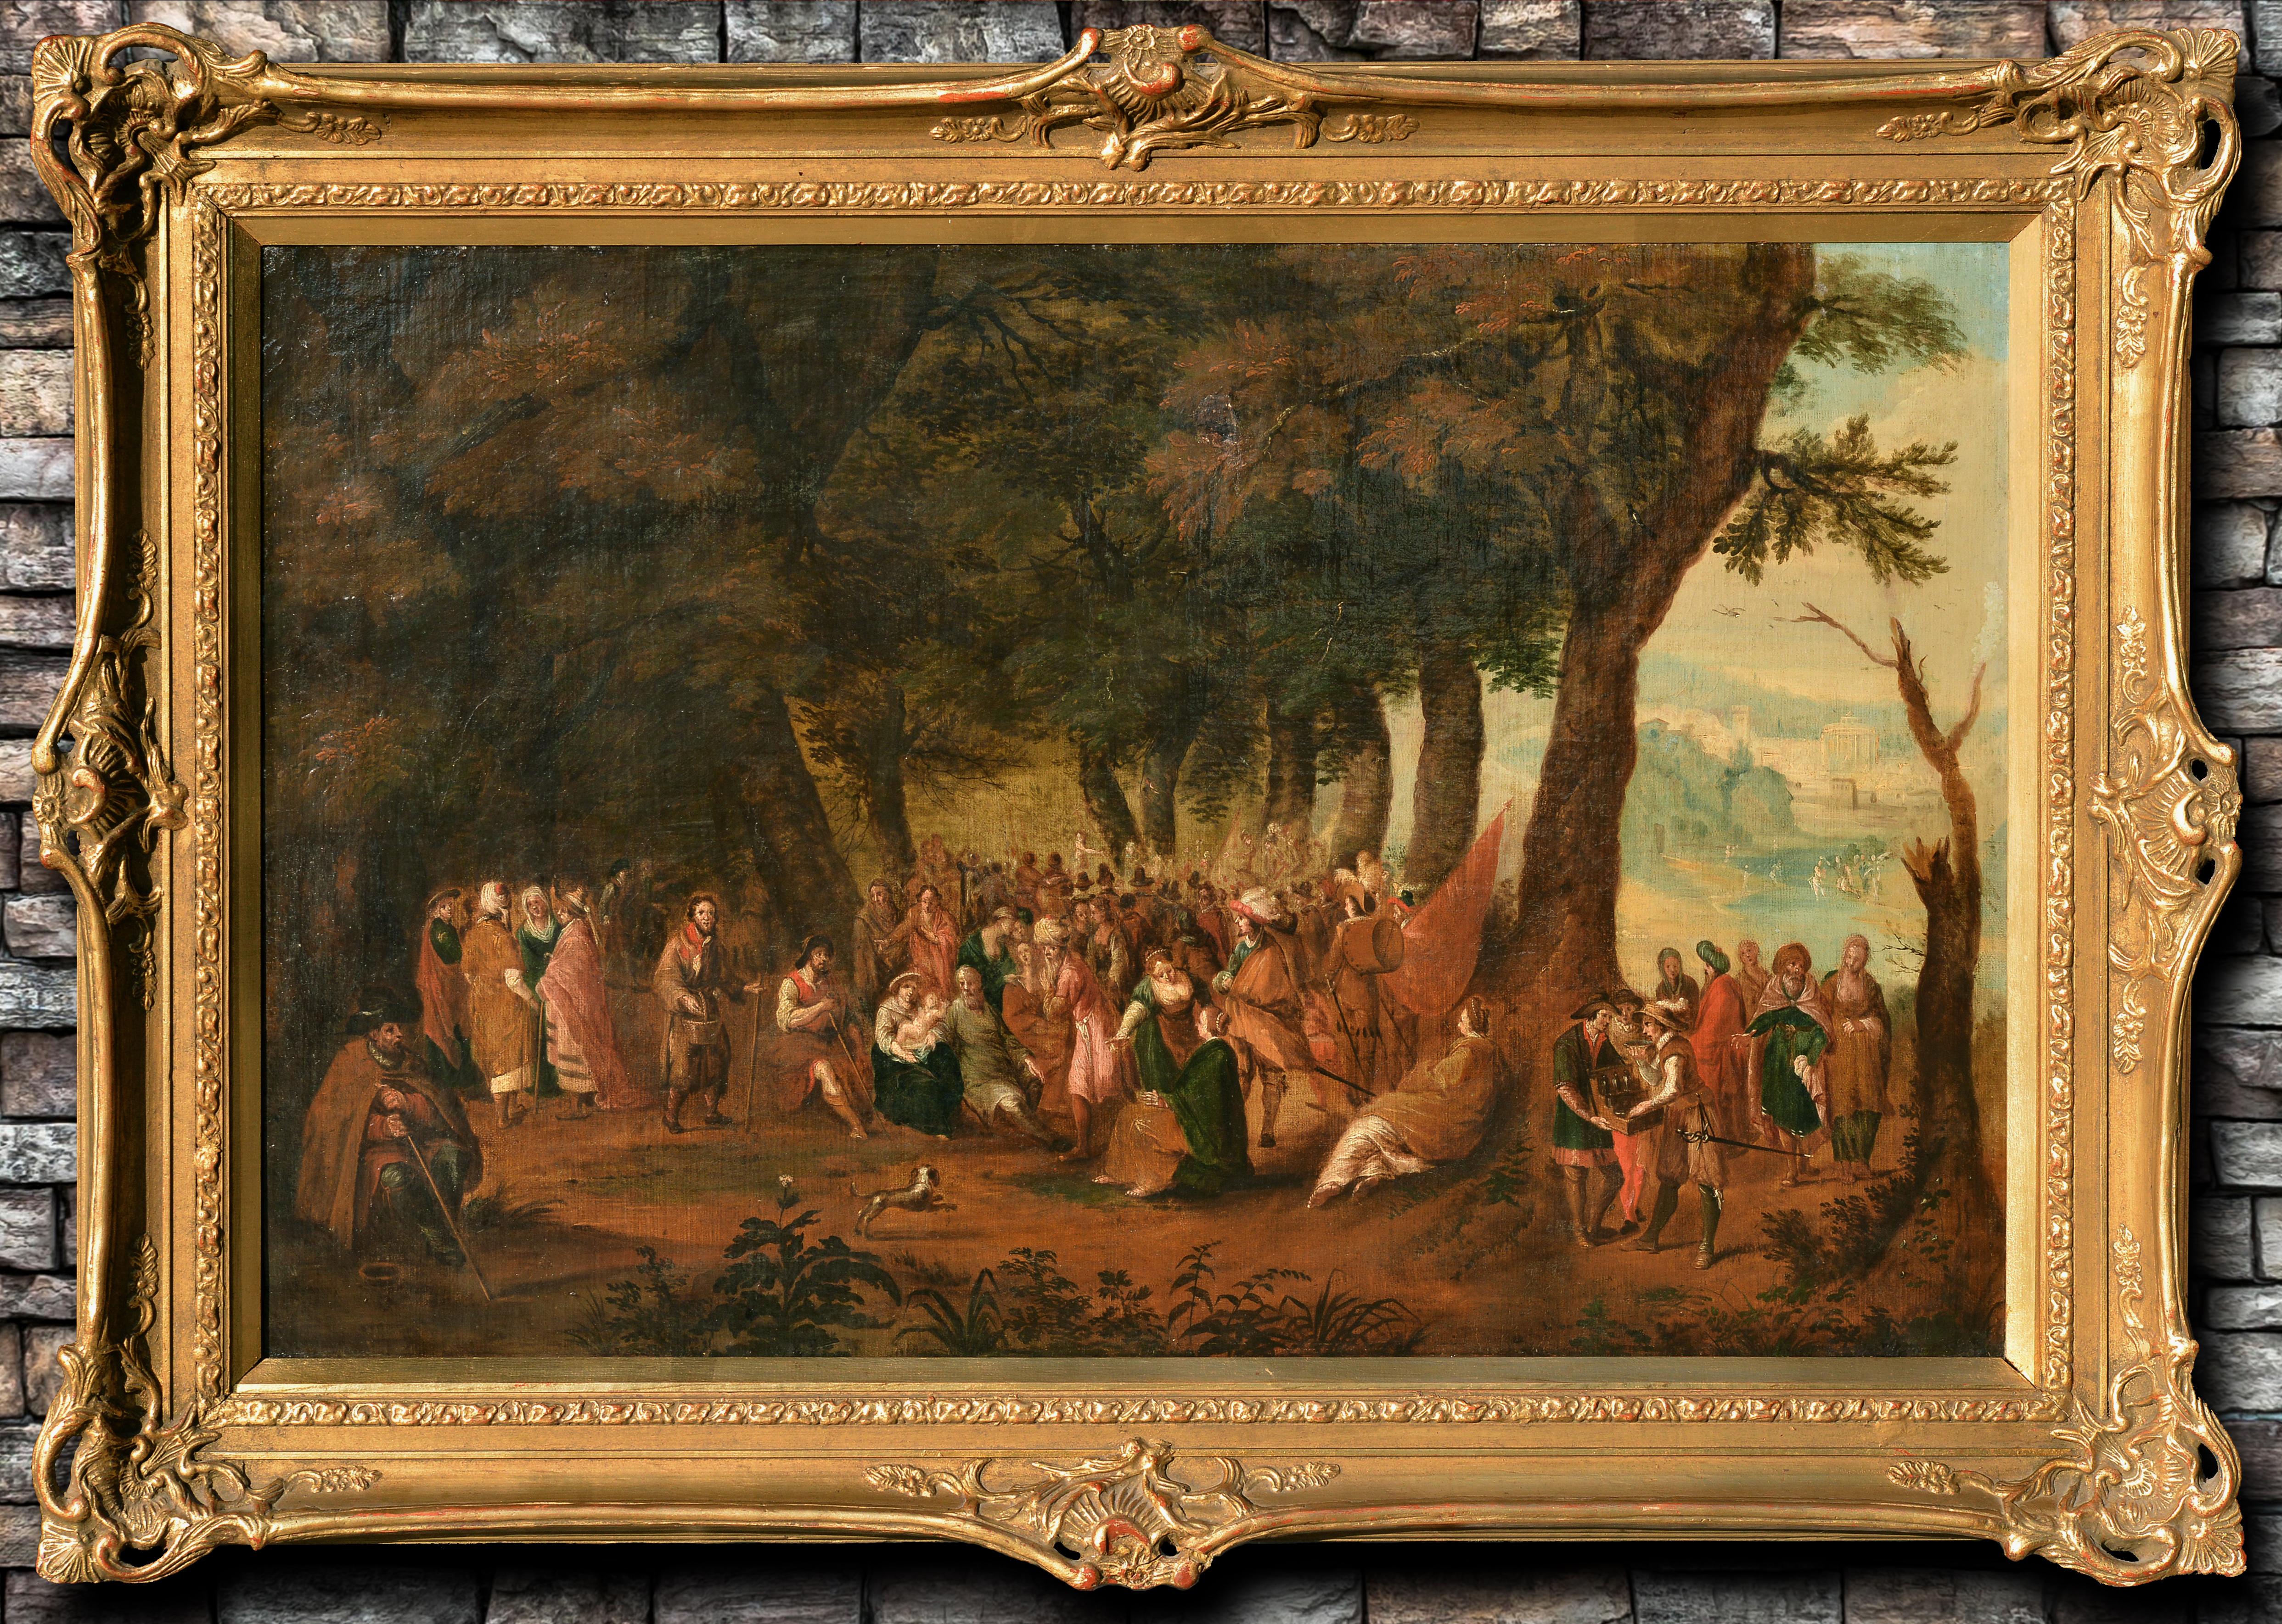 St. John's Day Fest Crowded Scene 17th century Flemish school Large Oil painting - Painting by Unknown